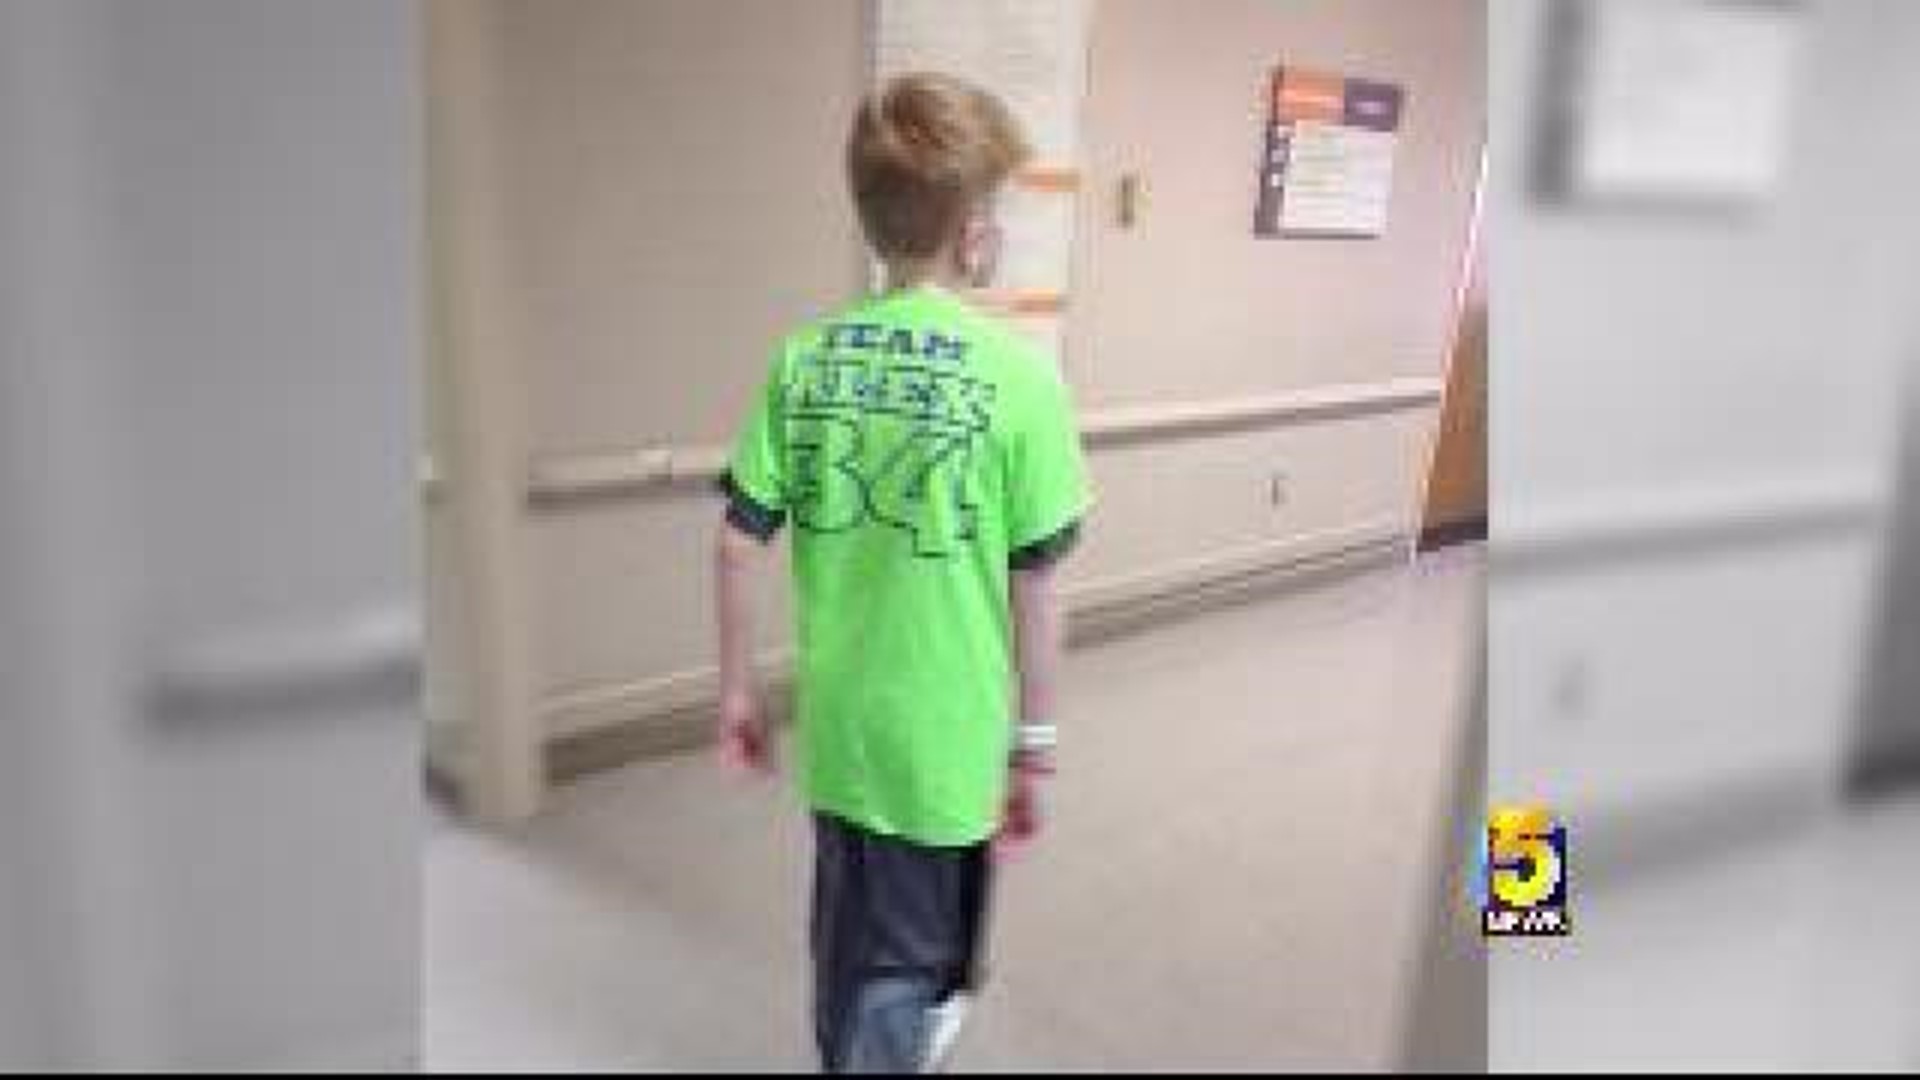 Benefit Held For Local Boy With Cancer